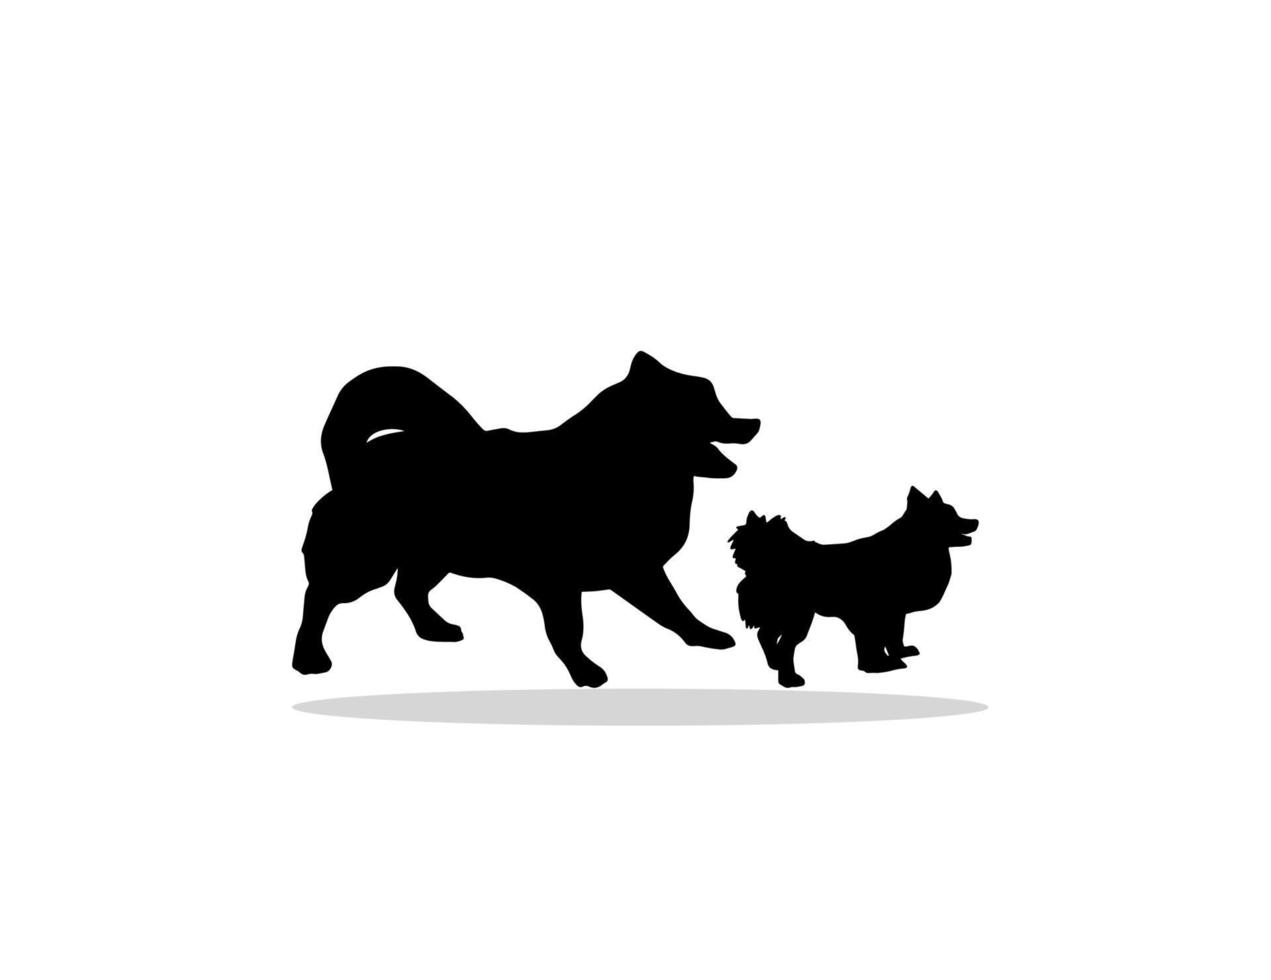 Silhouette Doggy and Puppy on White Background vector